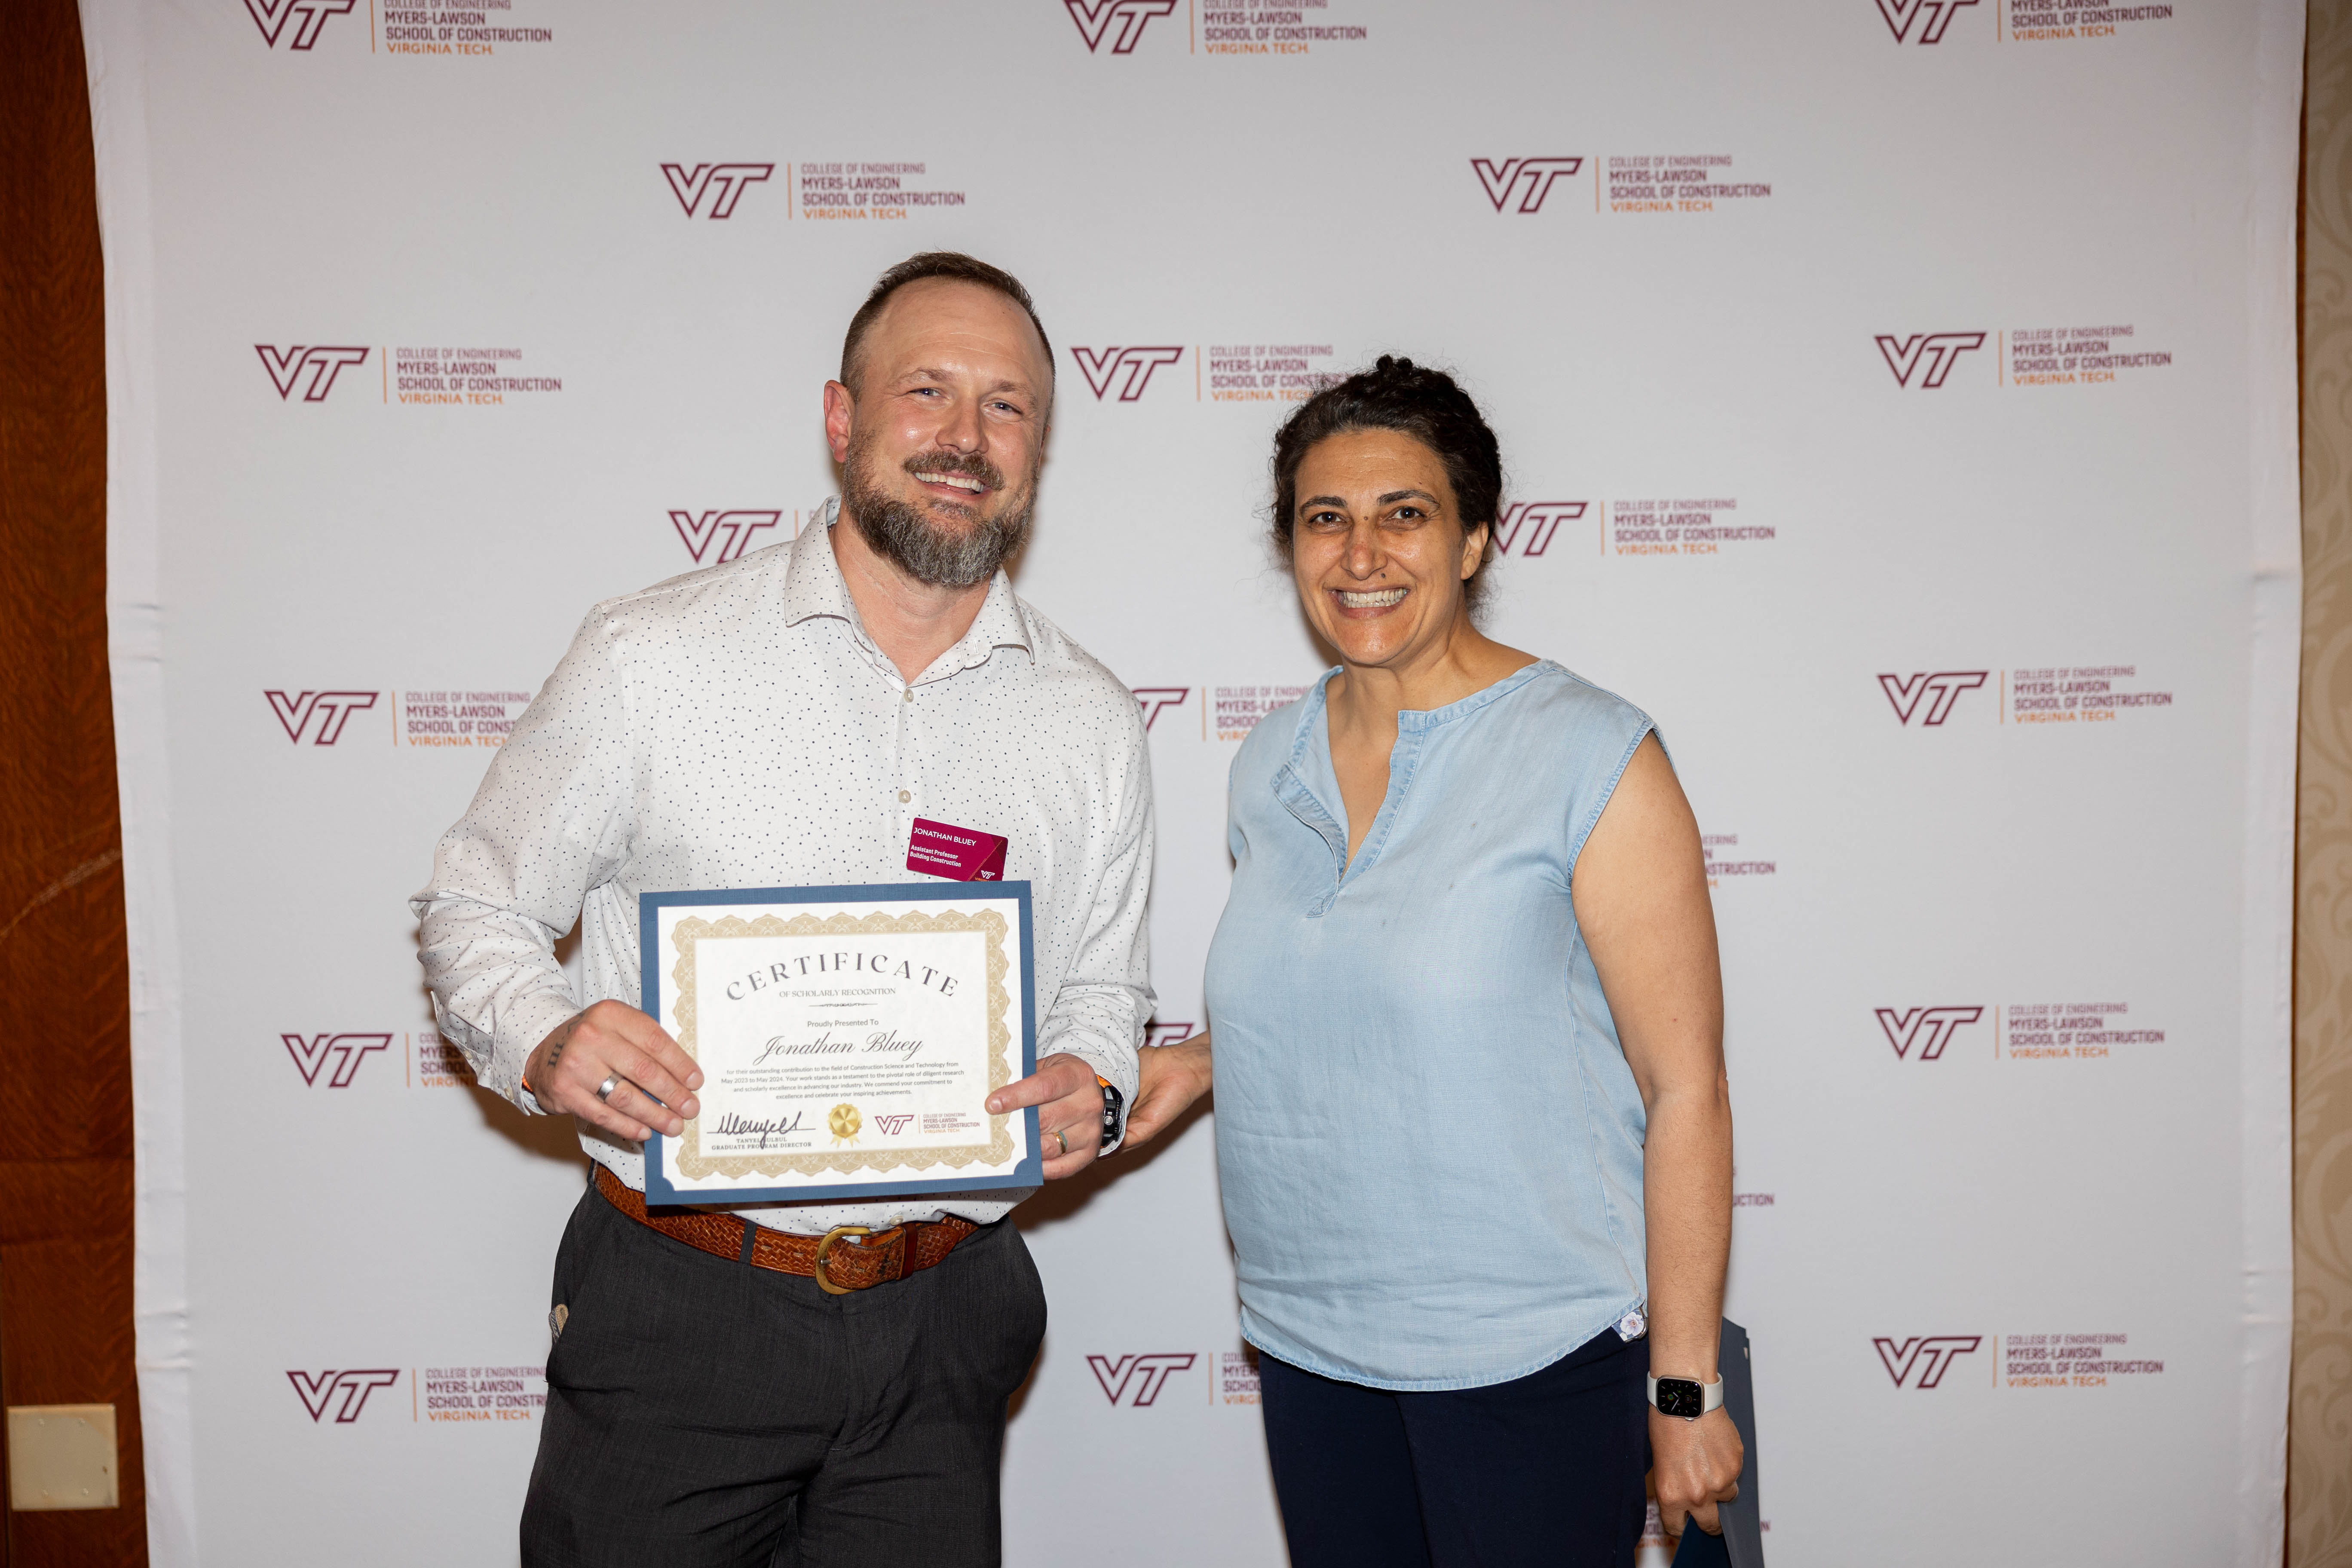 Jonathan Bluey (at left) and Tanyel Bulbul. Photo by Will Drew for Virginia Tech.